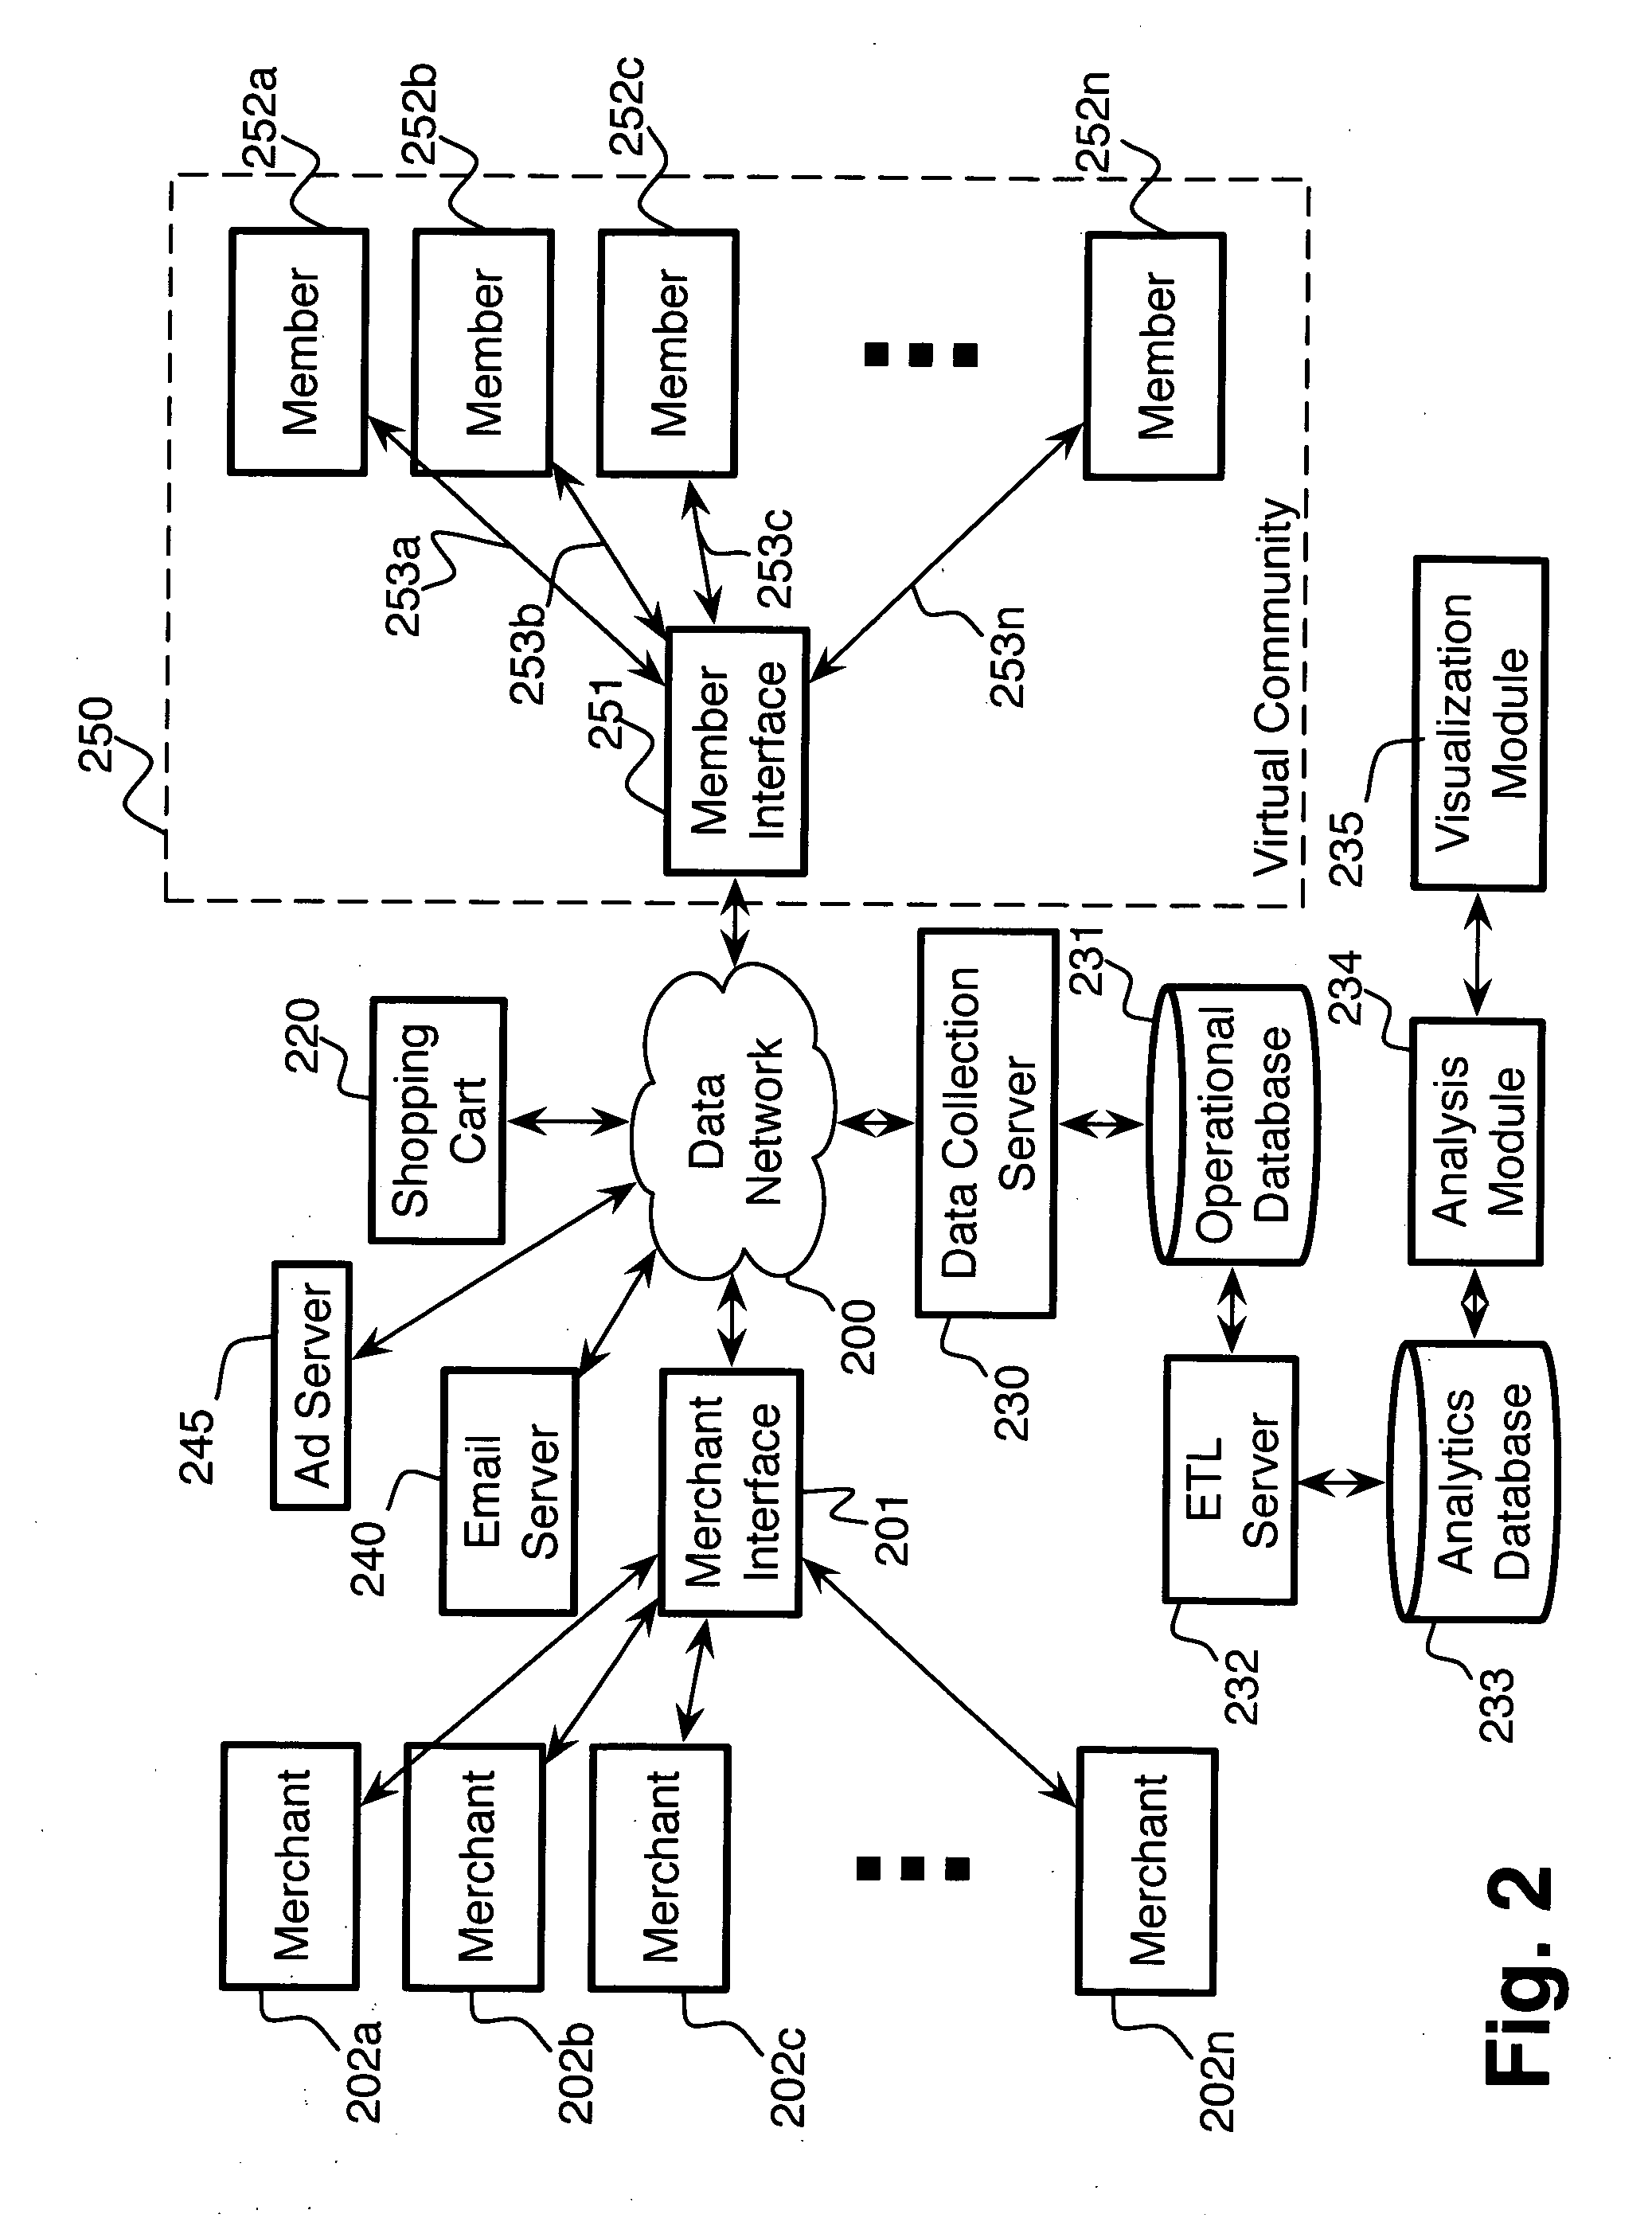 System and method for analyzing endorsement networks